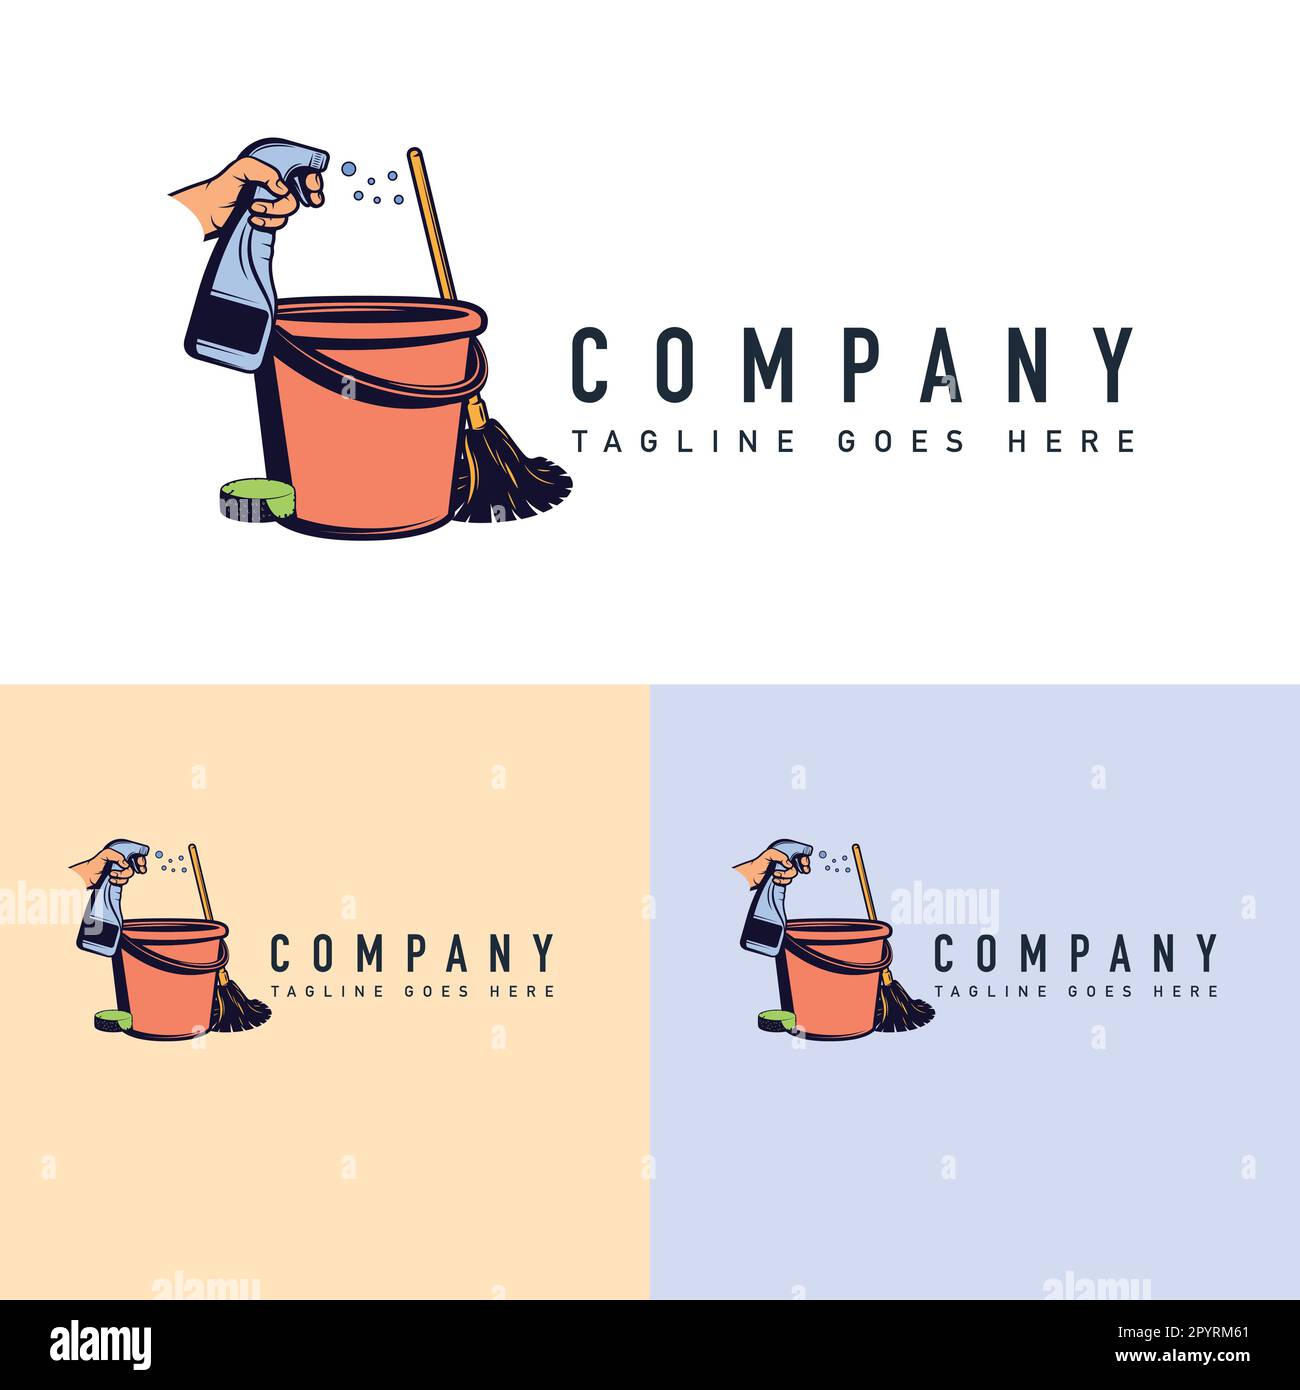 Cleaning company logo design template. Cleaning service vector illustration. Stock Vector